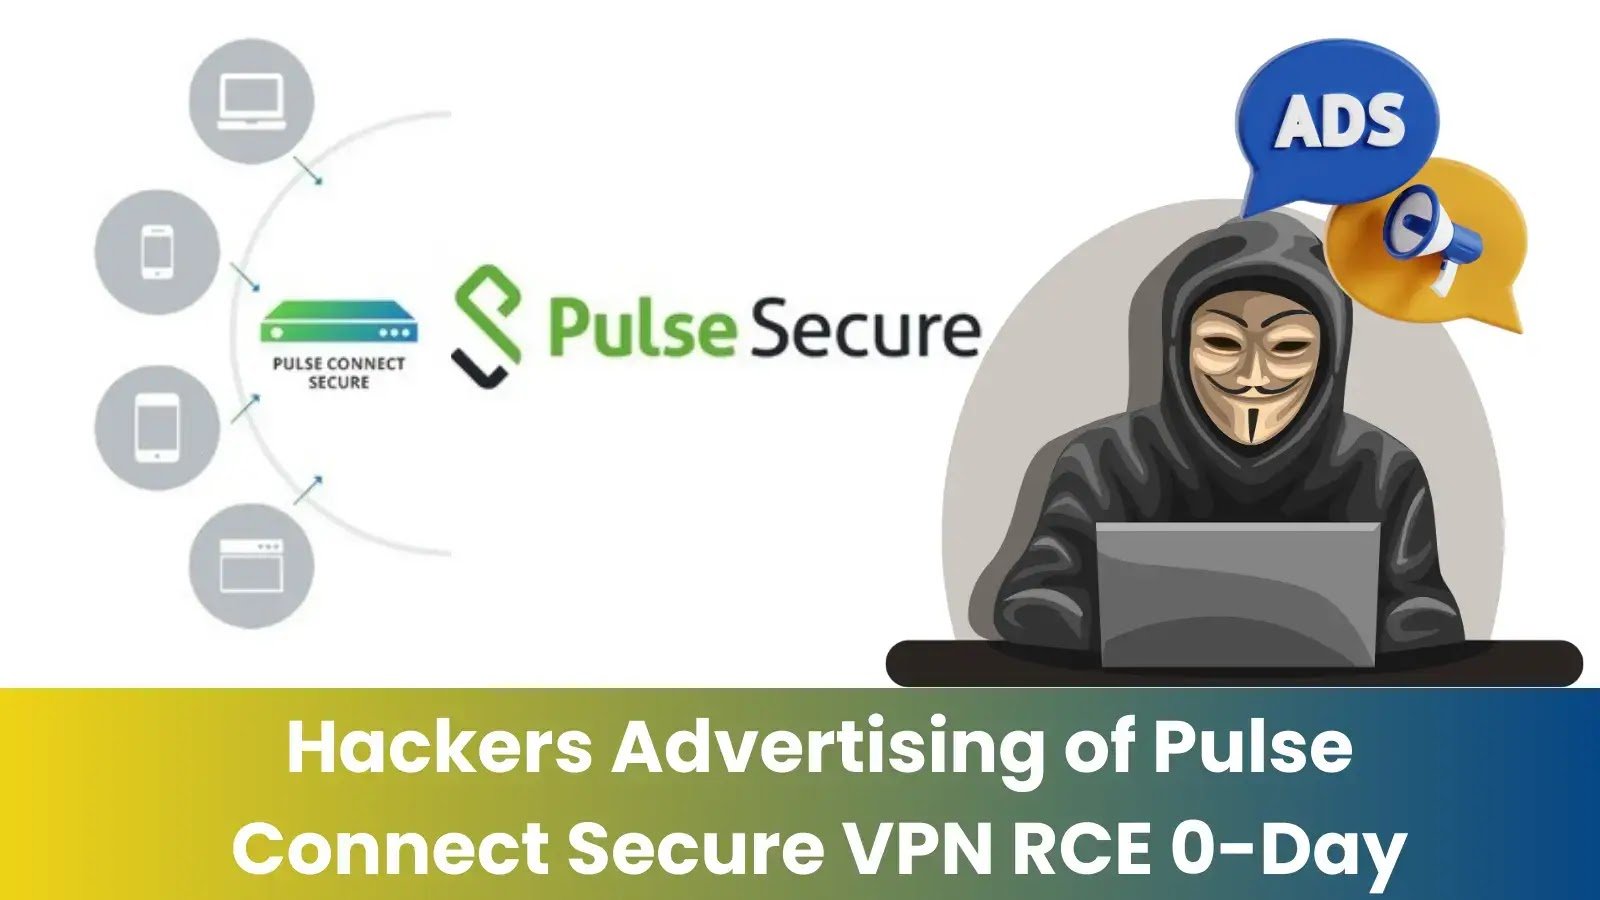 Hackers Advertising of Pulse Connect Secure VPN RCE 0-Day